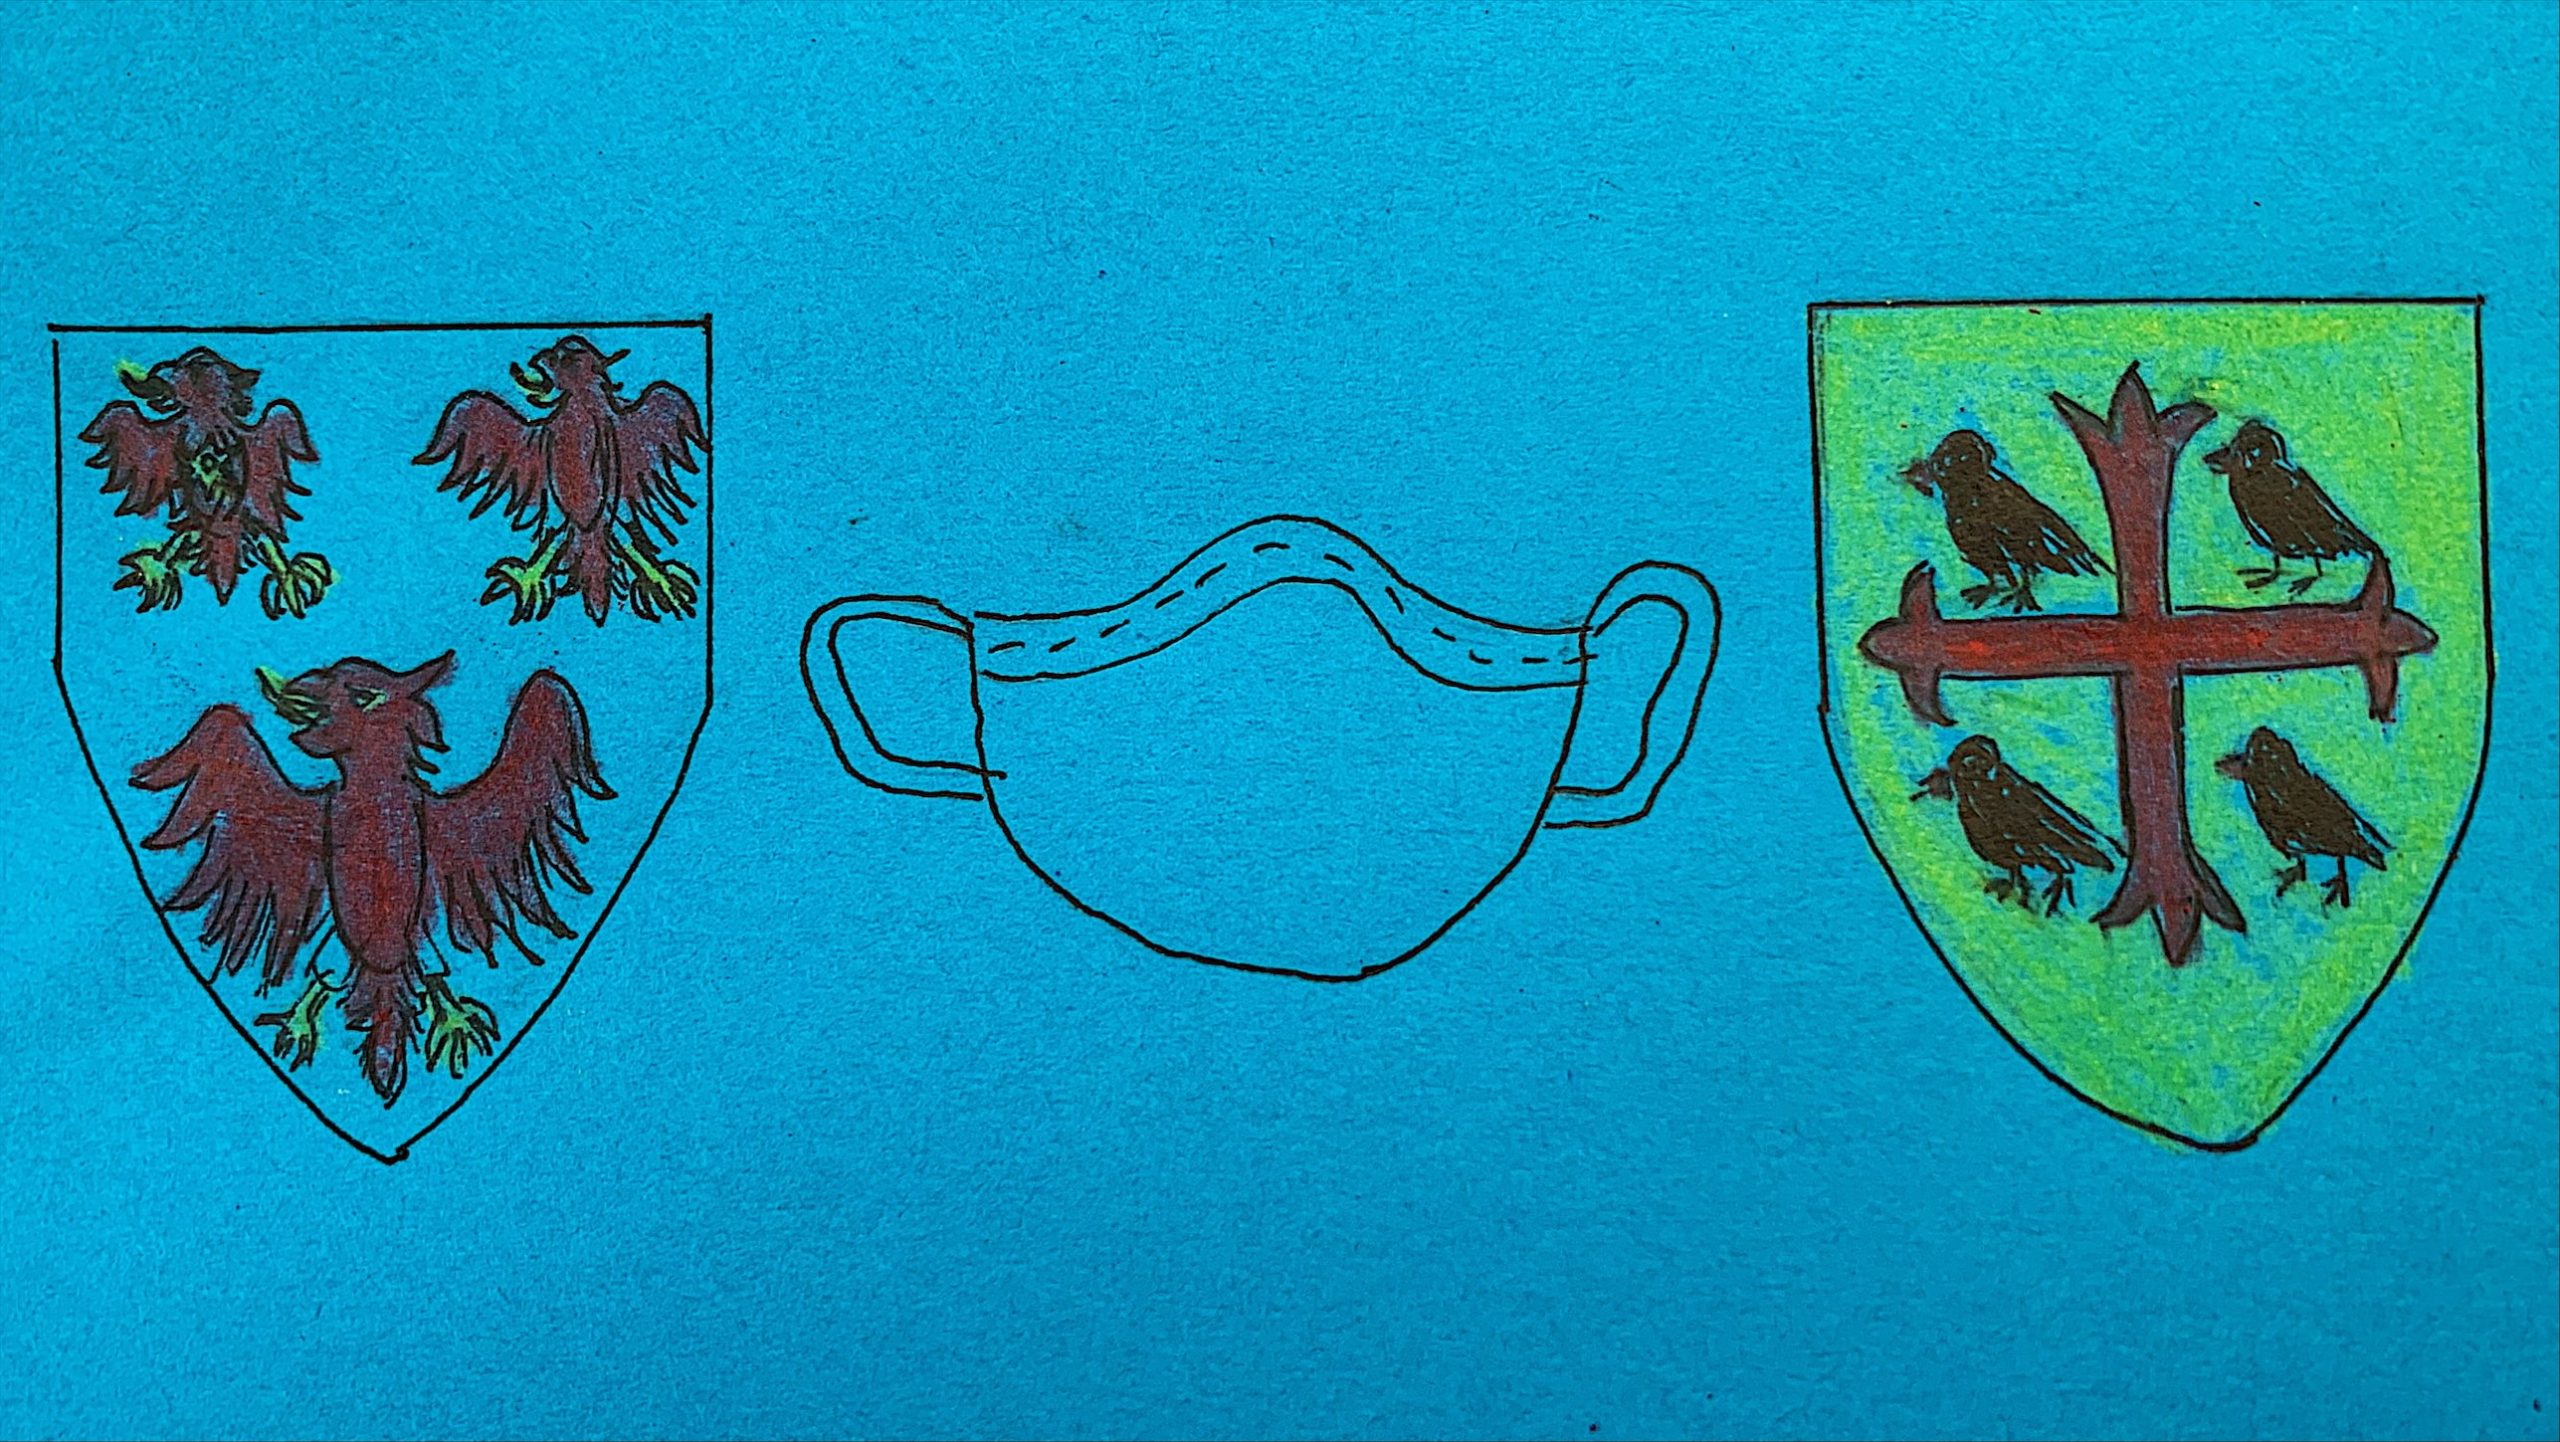 An illustration of the logos of The Queen's College and St Edmund Hall, alongside a face covering